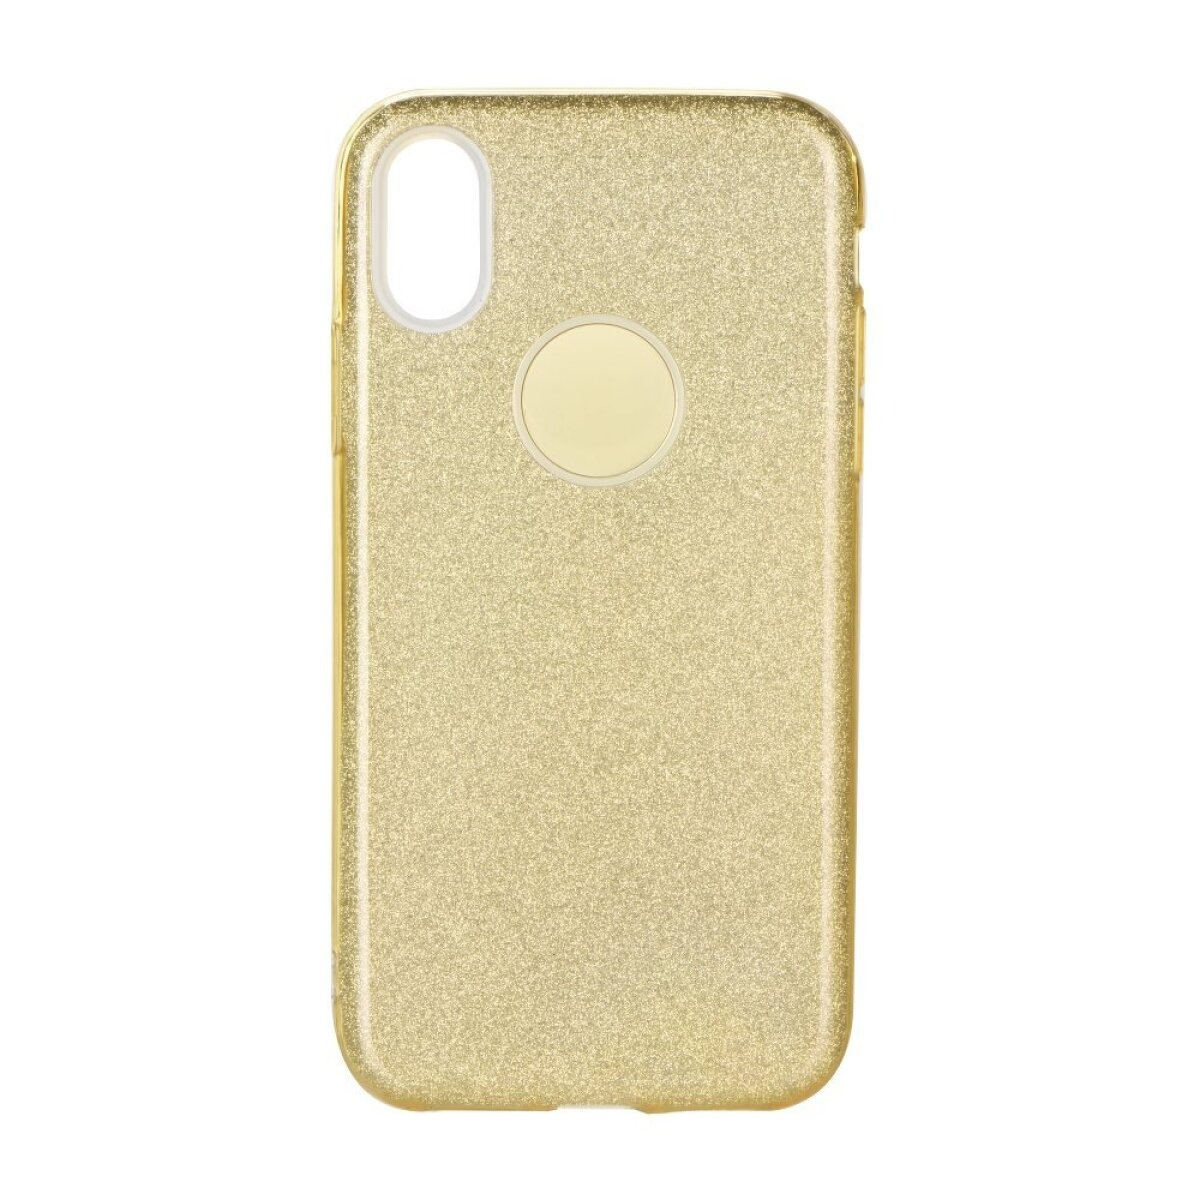 Galaxy Cover, A71, A71 SHINING gold, Full FORCELL Galaxy Gold Samsung,